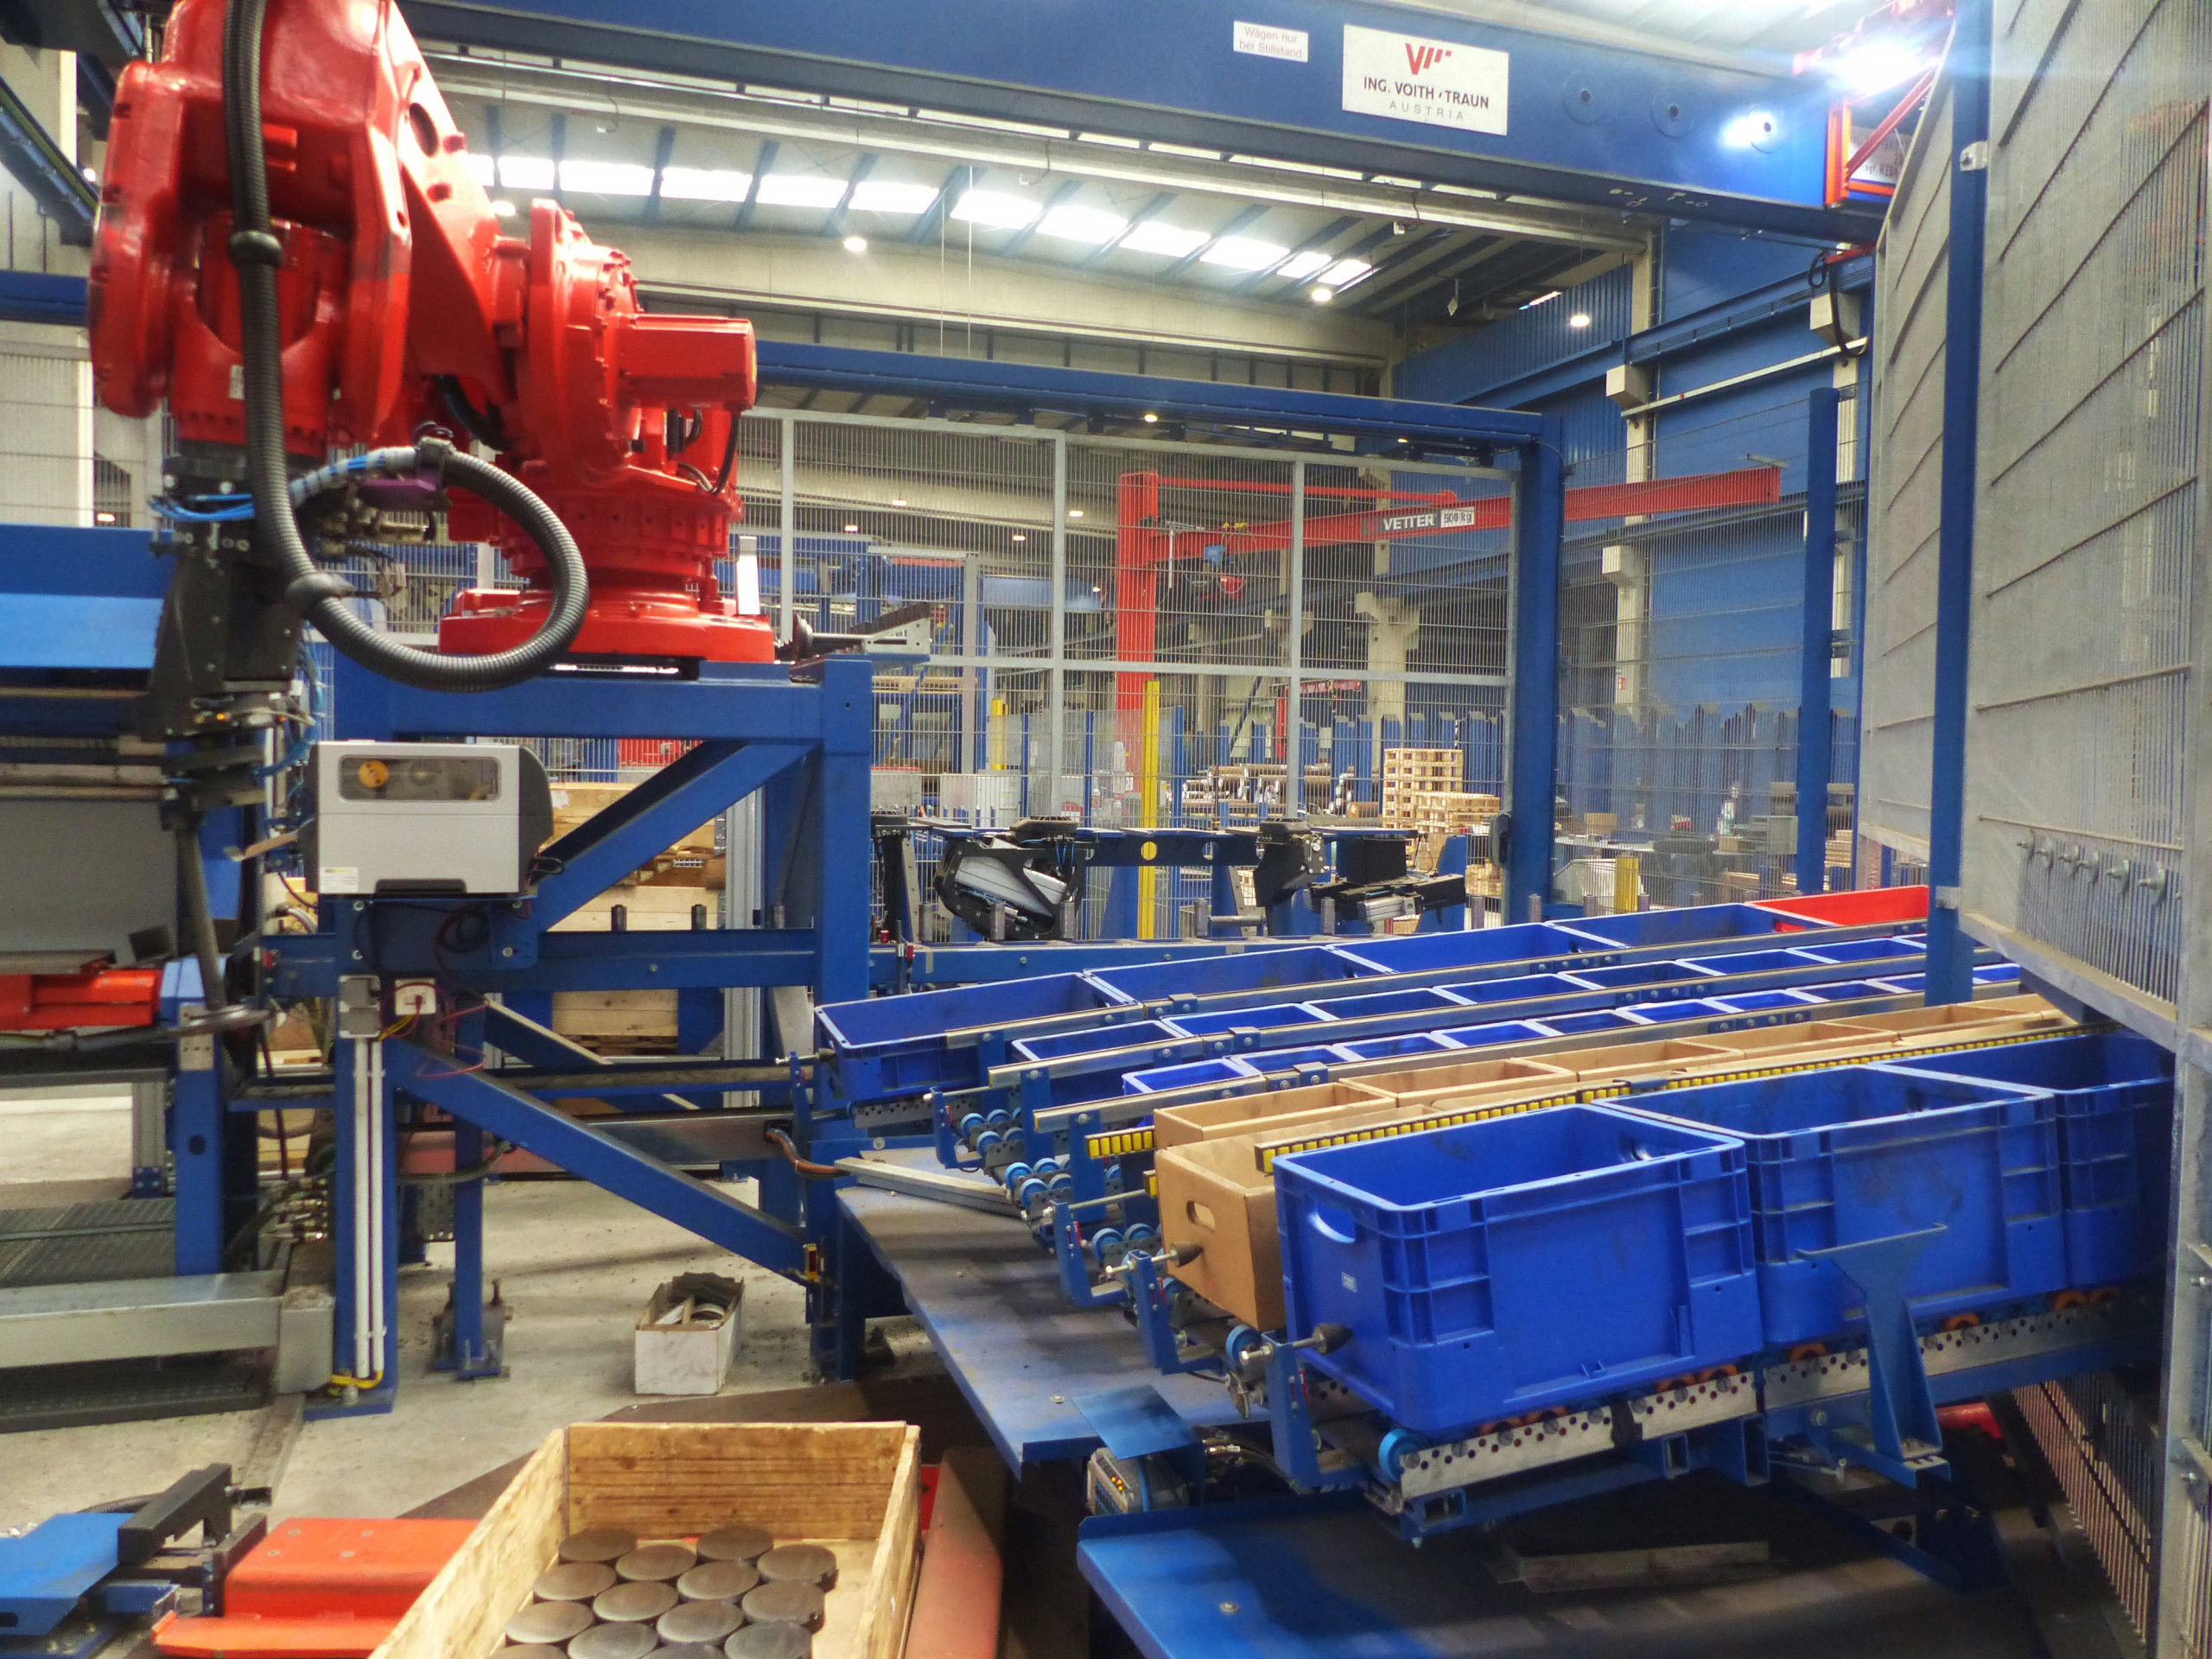 The robot at the saw loads the pallets automatically, and the employees then only take care of securing the load. ©Kasto